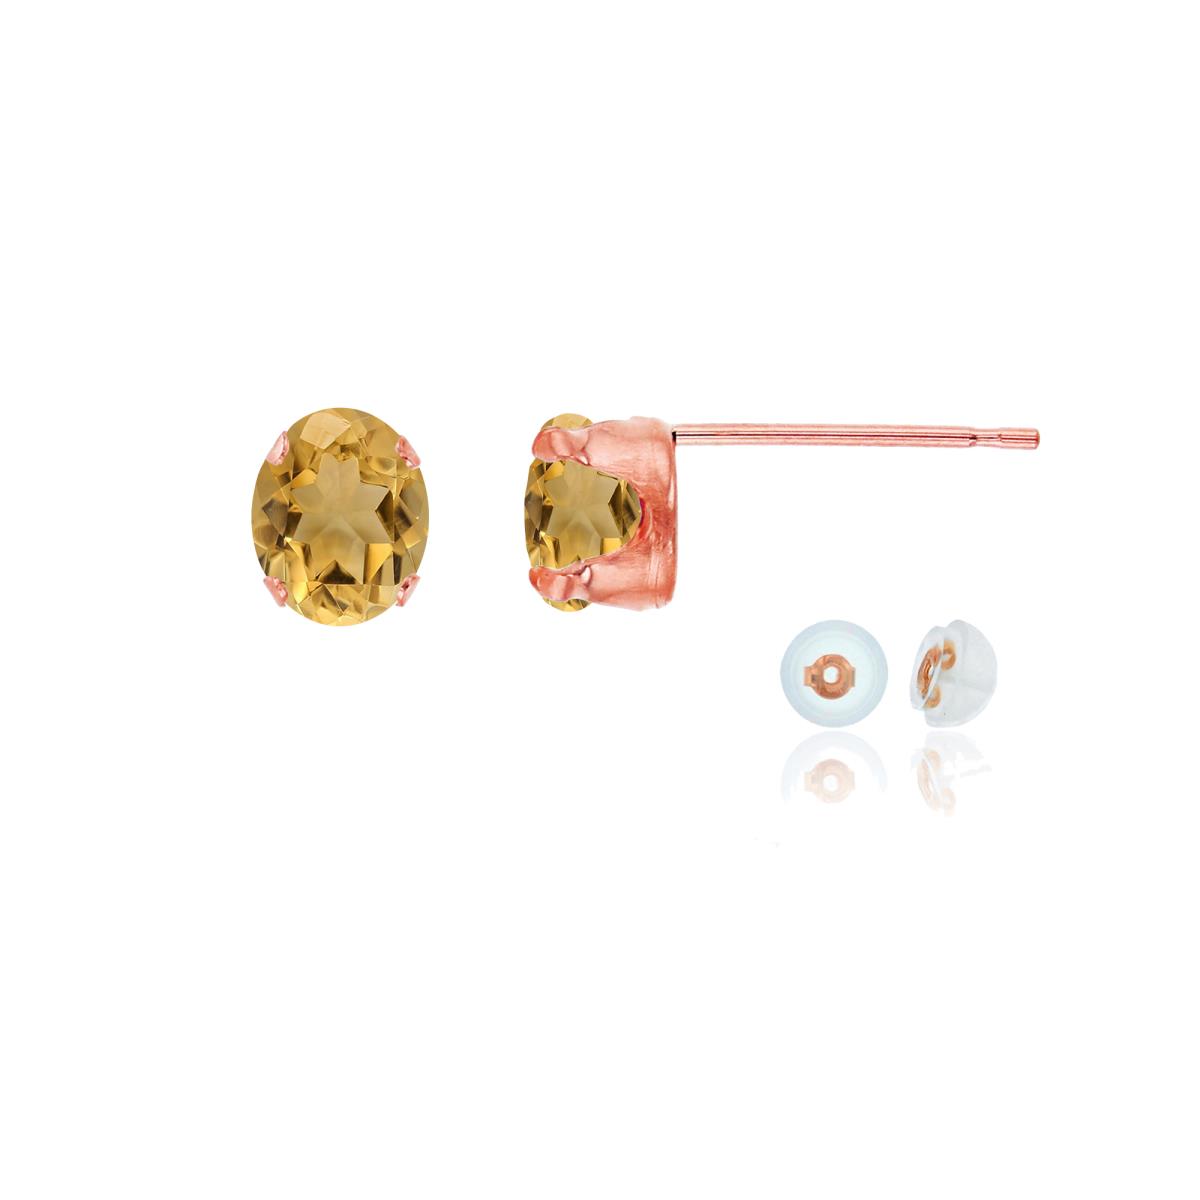 10K Rose Gold 6x4mm Oval Citrine Stud Earring with Silicone Back